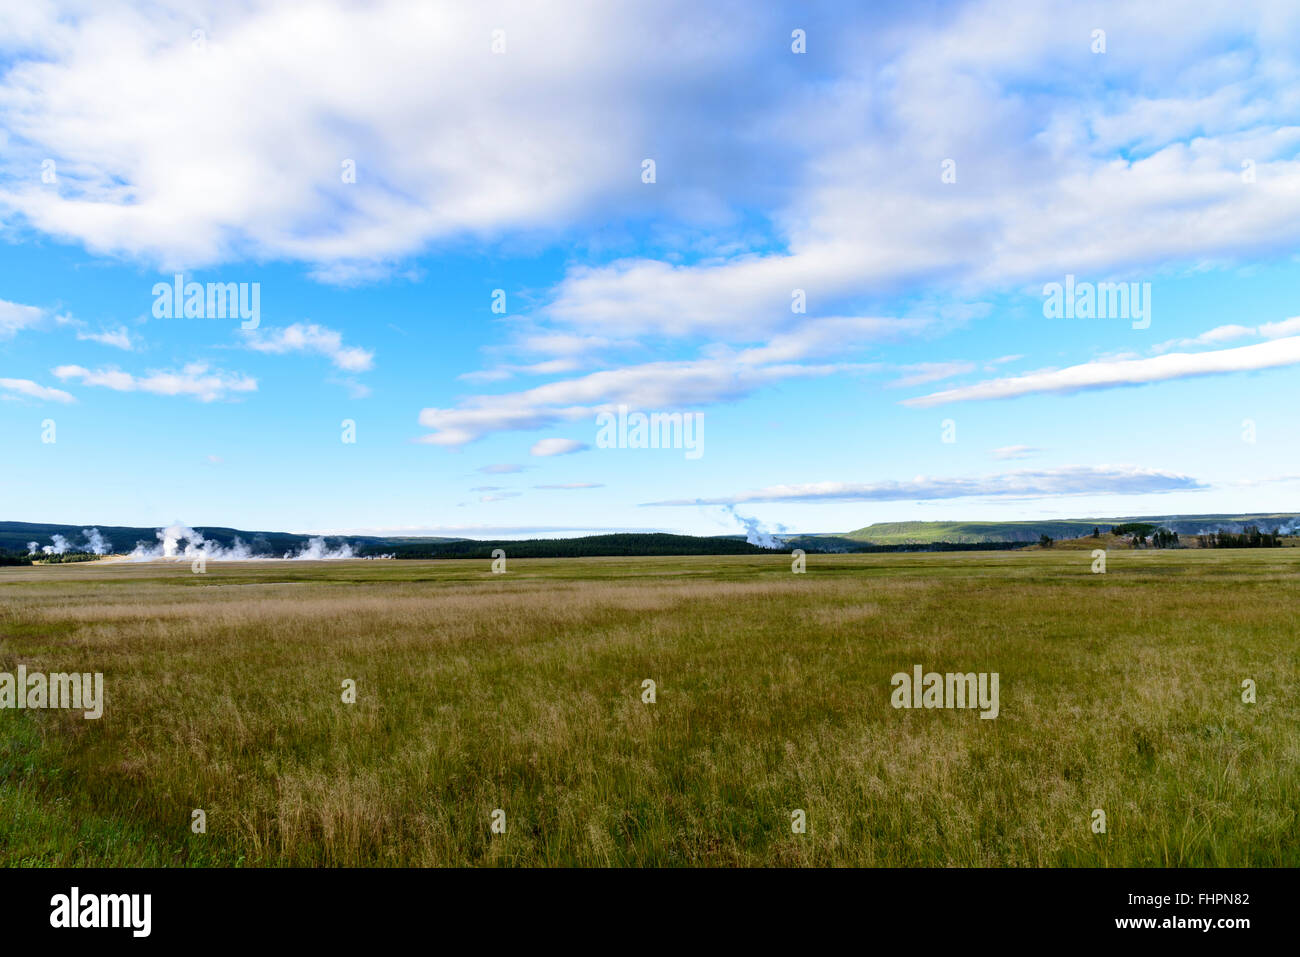 Wide open green grassy field under blue sky with white fluffy clouds with geysers in background. Stock Photo